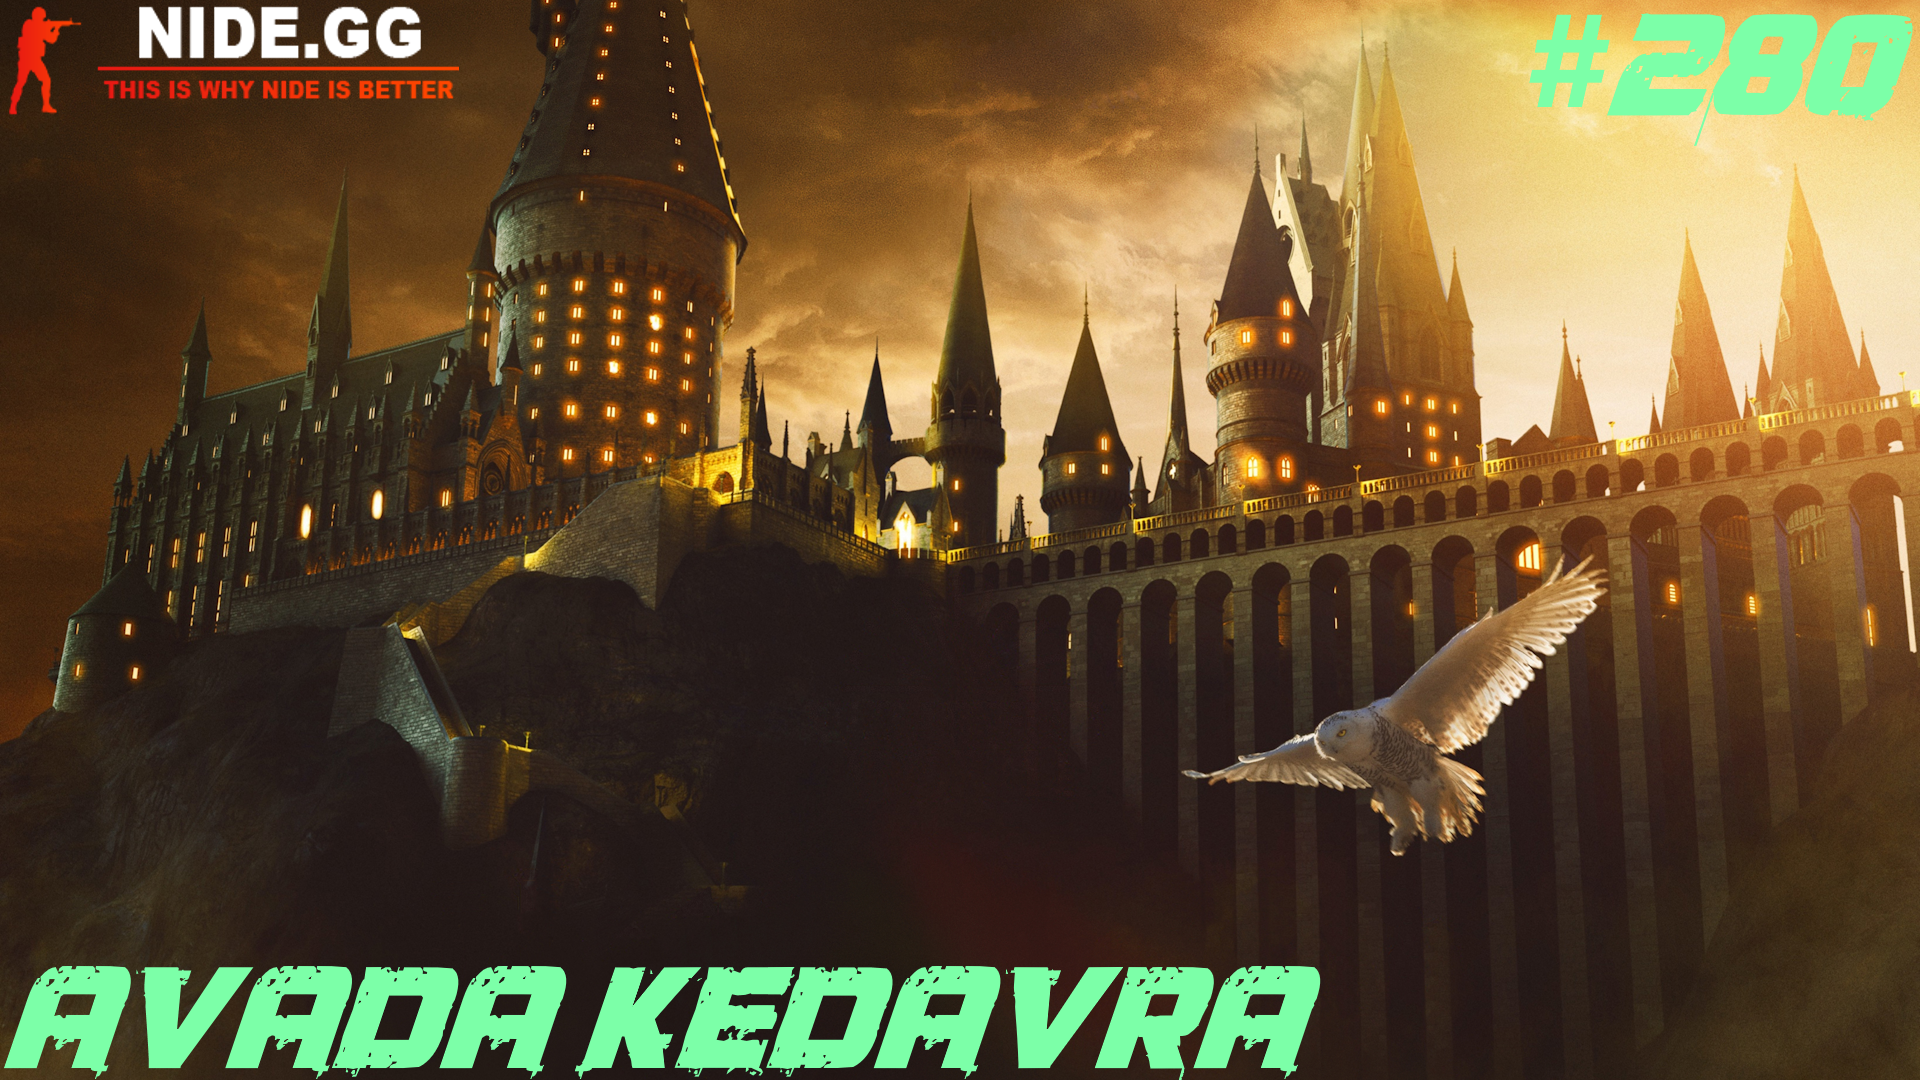 More information about "CS:S ZE Event #280 - Avada Kedavra"